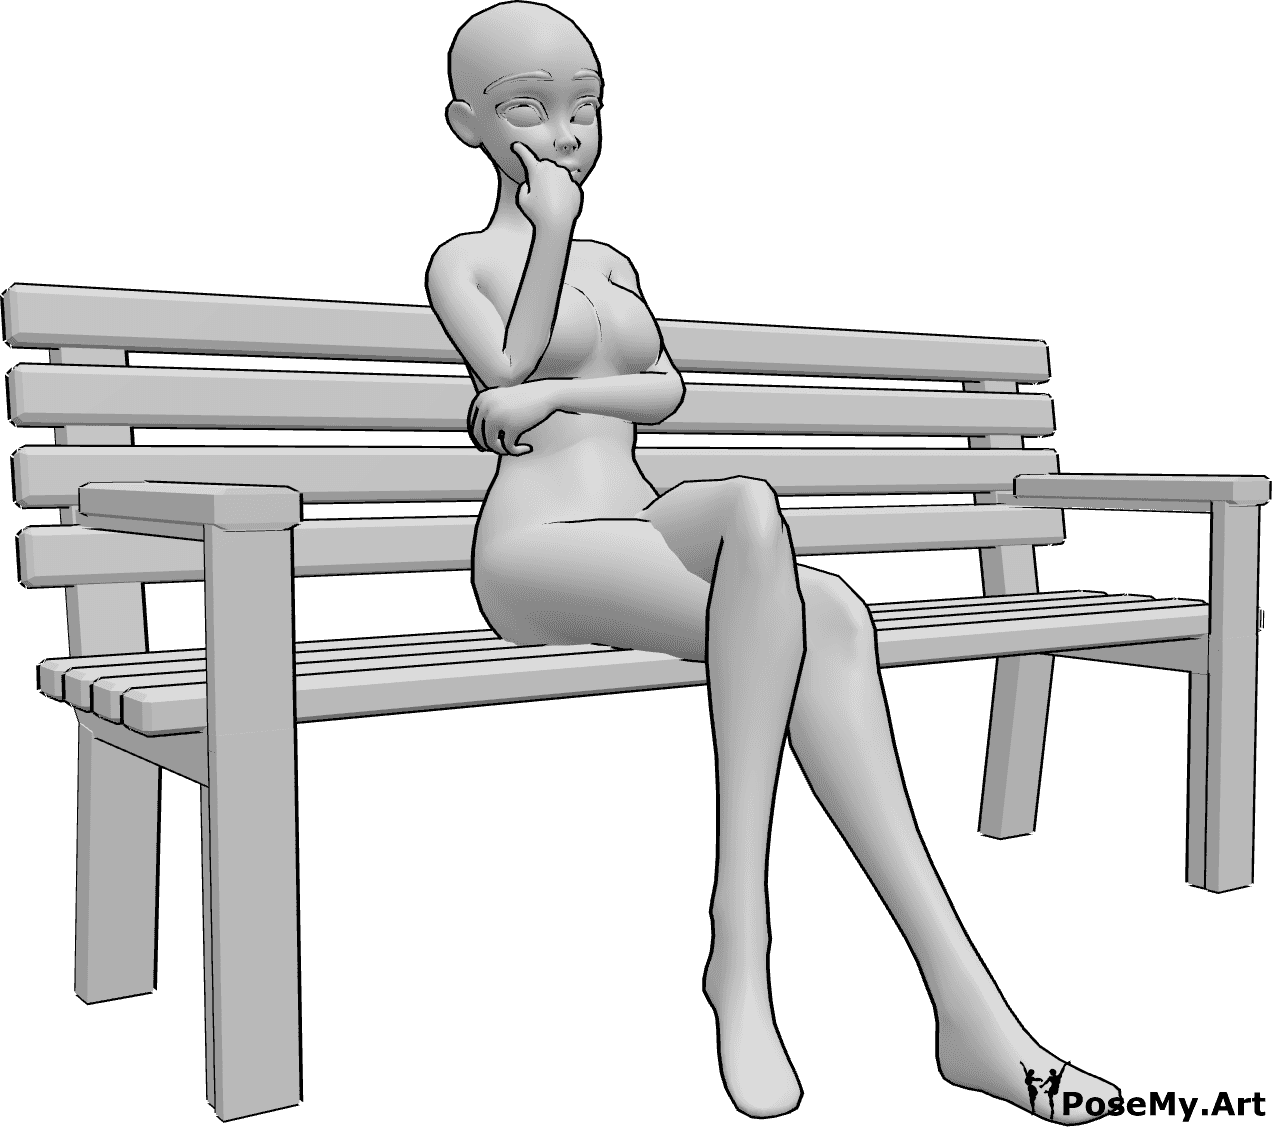 Pose Reference- Anime sitting bench pose - Anime female is sitting alone on the bench, her legs are crossed and she is looking forward, thinking